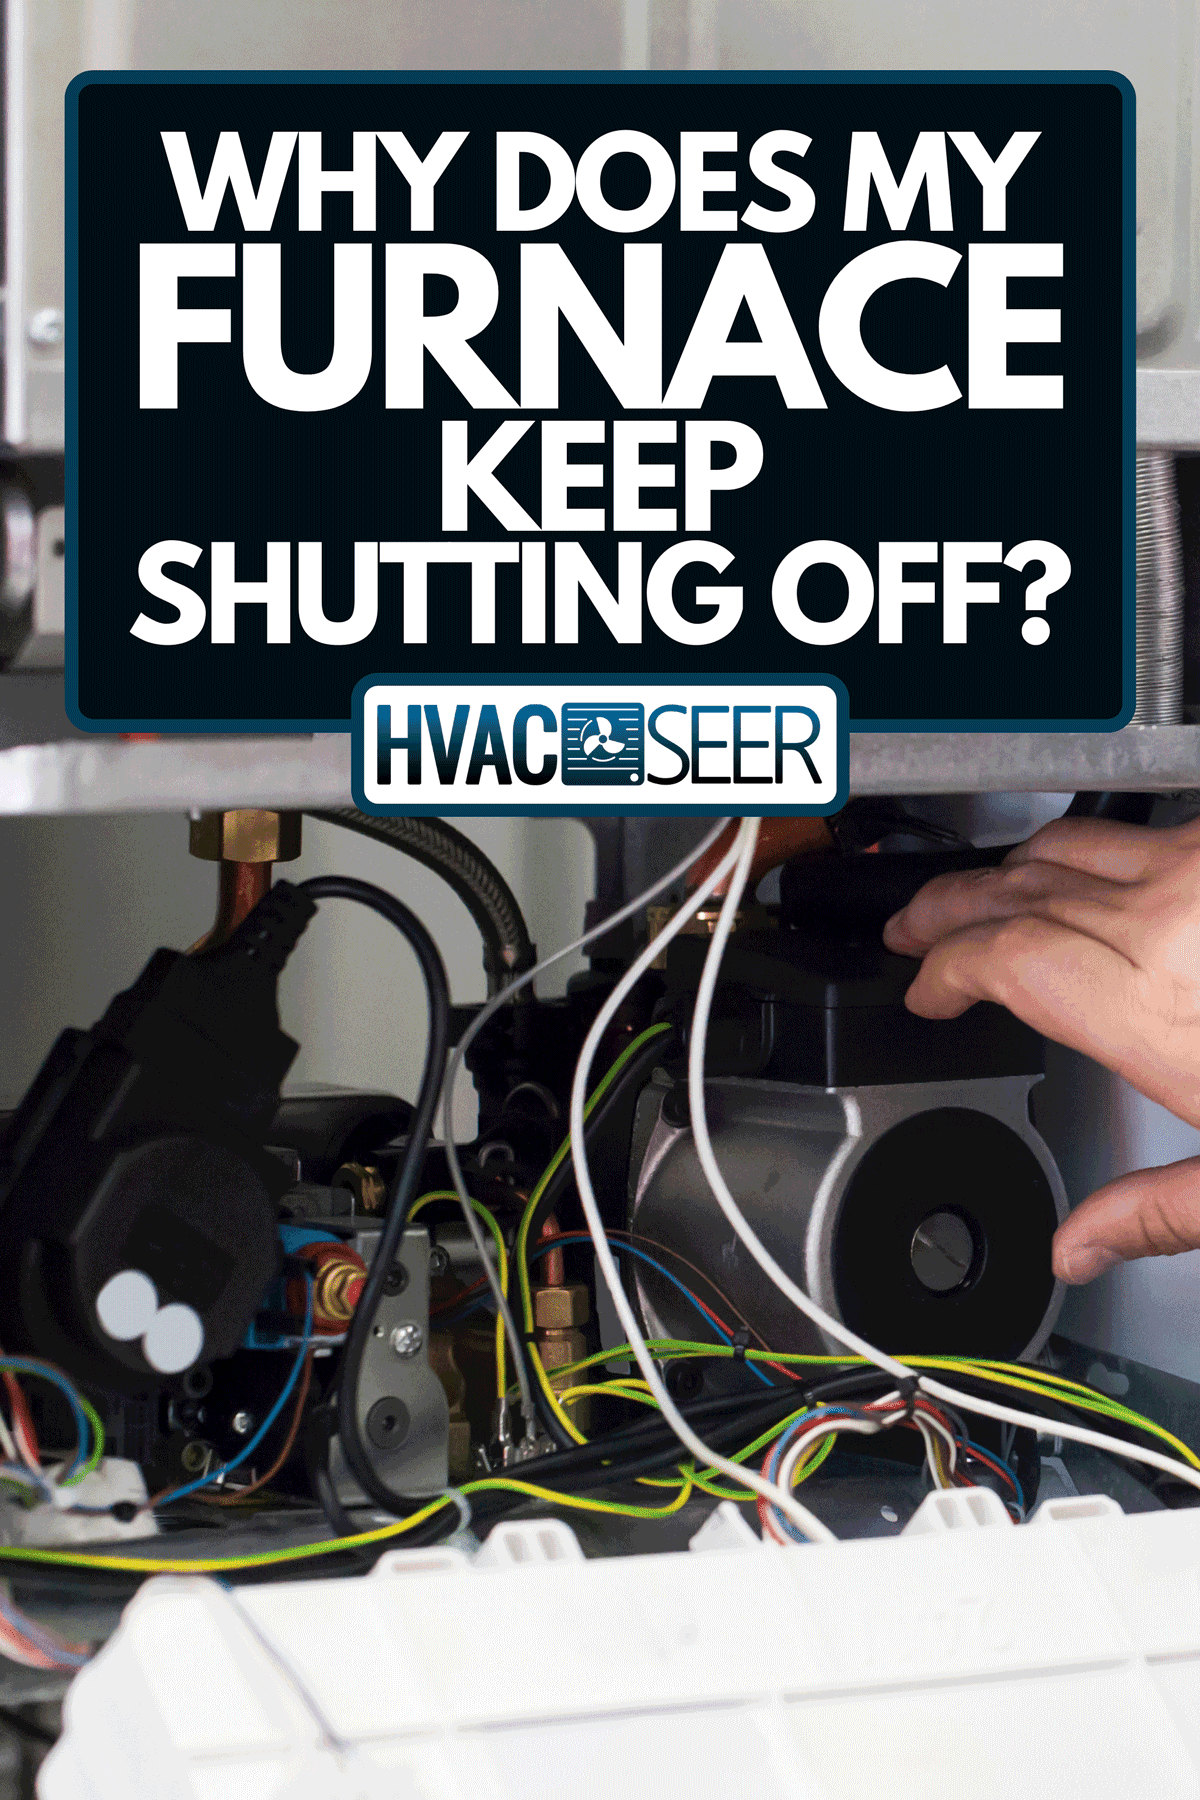 Technician servicing furnace system, Why Does My Furnace Keep Shutting Off?